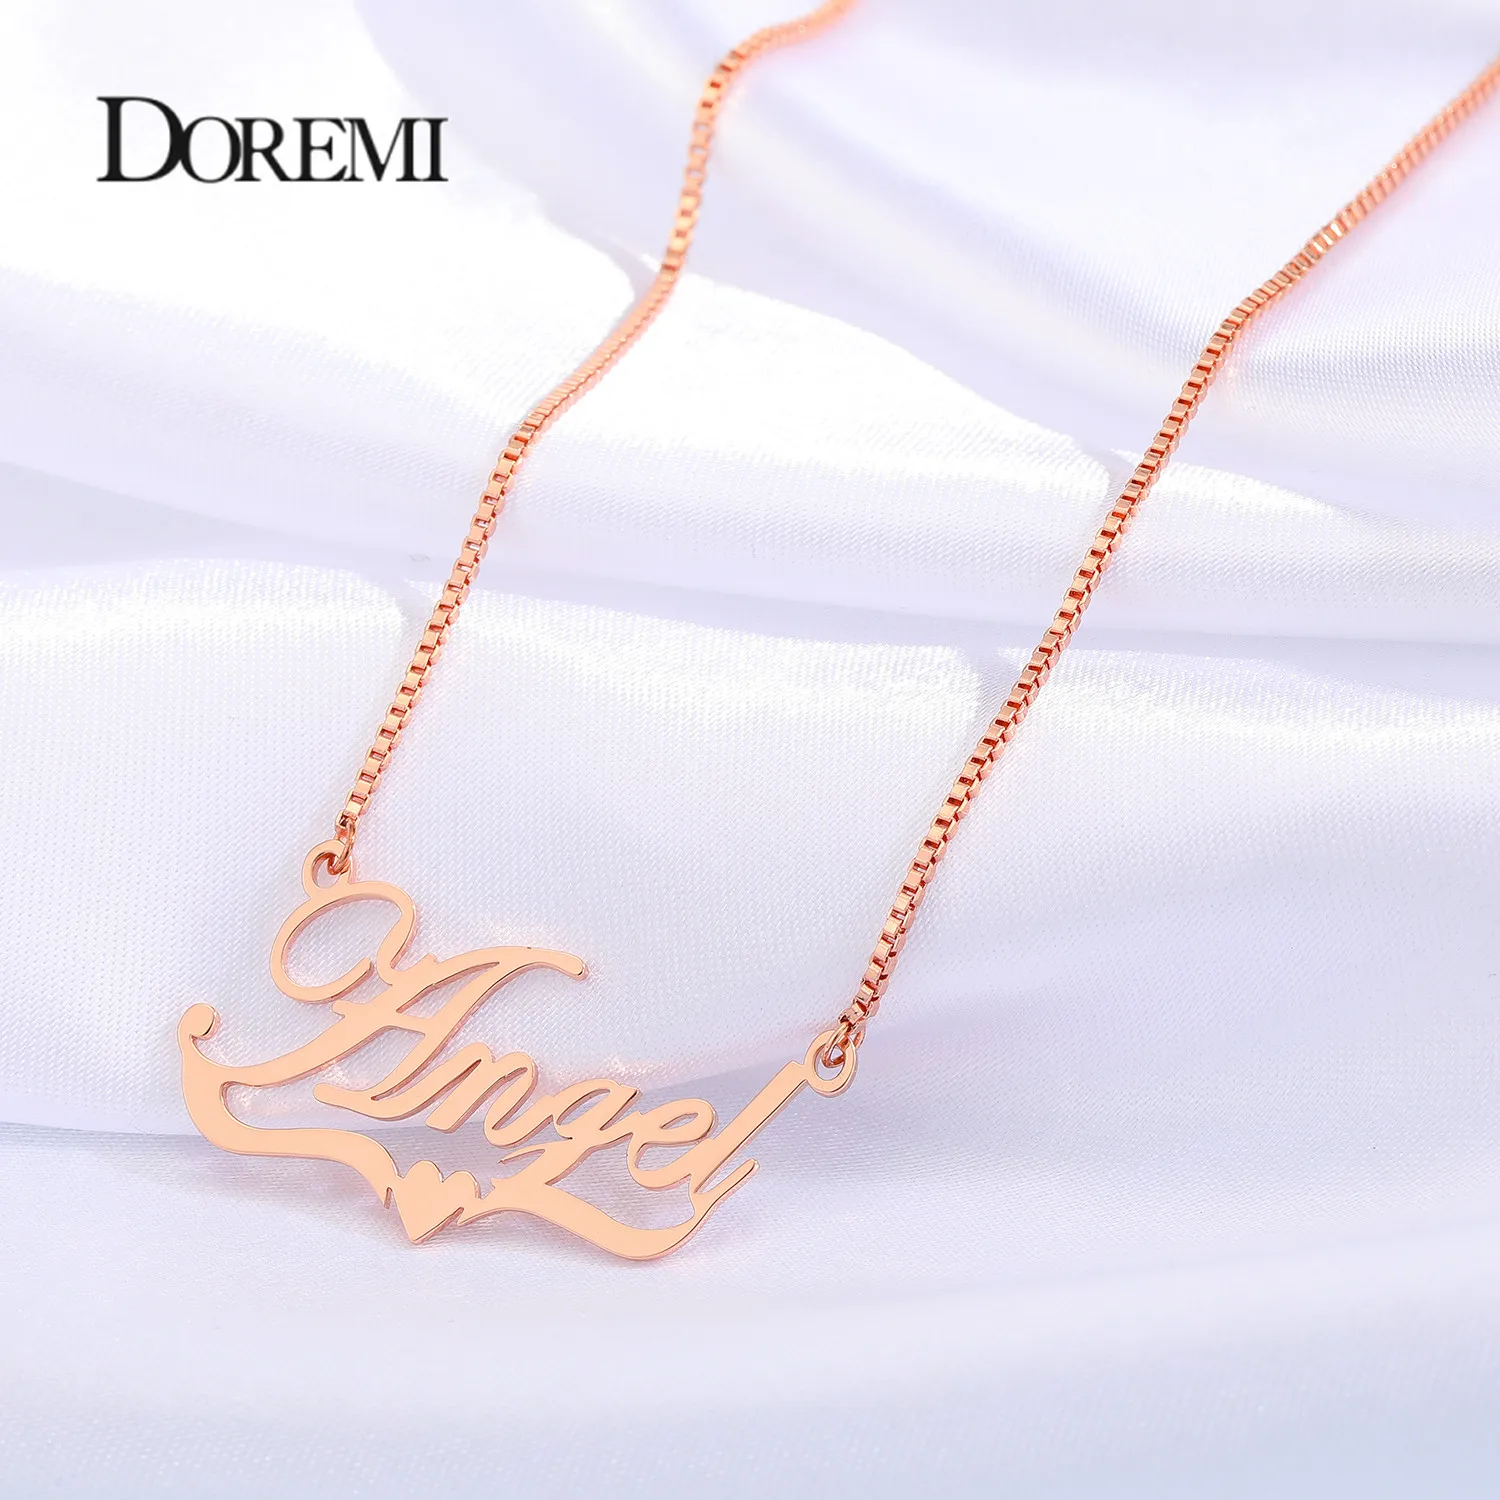 DOREMI Stainless Steel  Custom Name Necklace Personalized Name Pendant Heart Choker for Women Men Jewelry Valentine's Day Gift 50pcs 25pcs heart earrings cards necklace display card cardboard for jewelry packing retail price tags valentine s day gifts